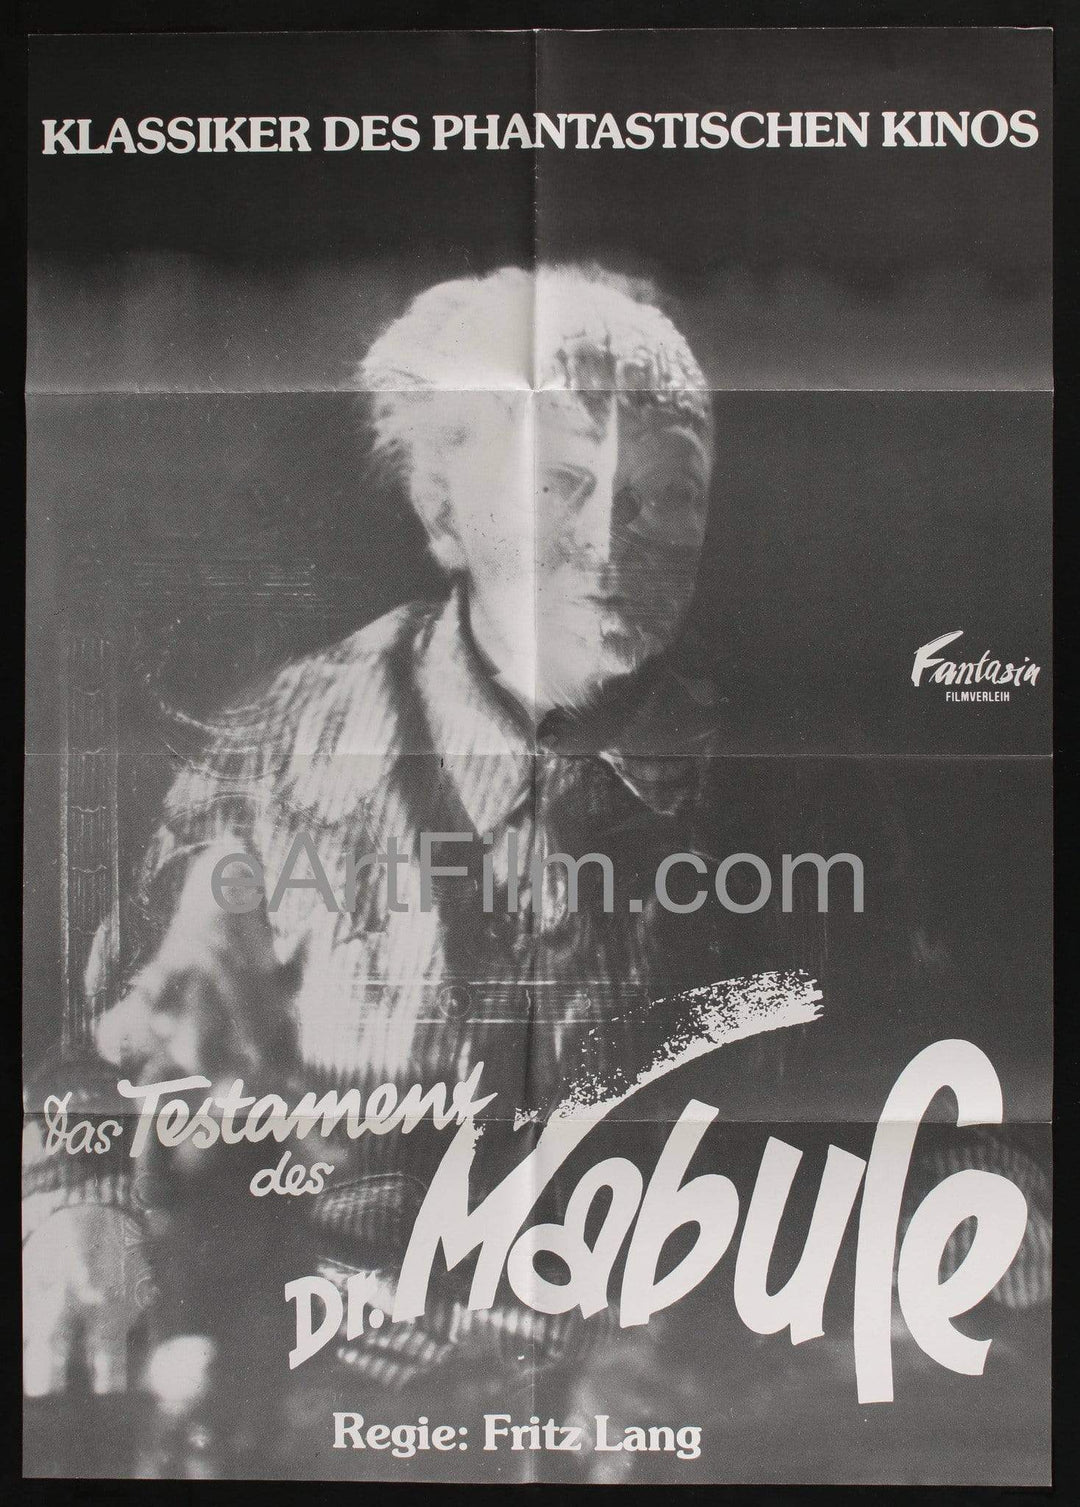 eArtFilm.com German "A1" Movie Poster (23"x33") Testament of Dr. Mabuse-R70s-1933-23x33-German A1-Fritz Lang